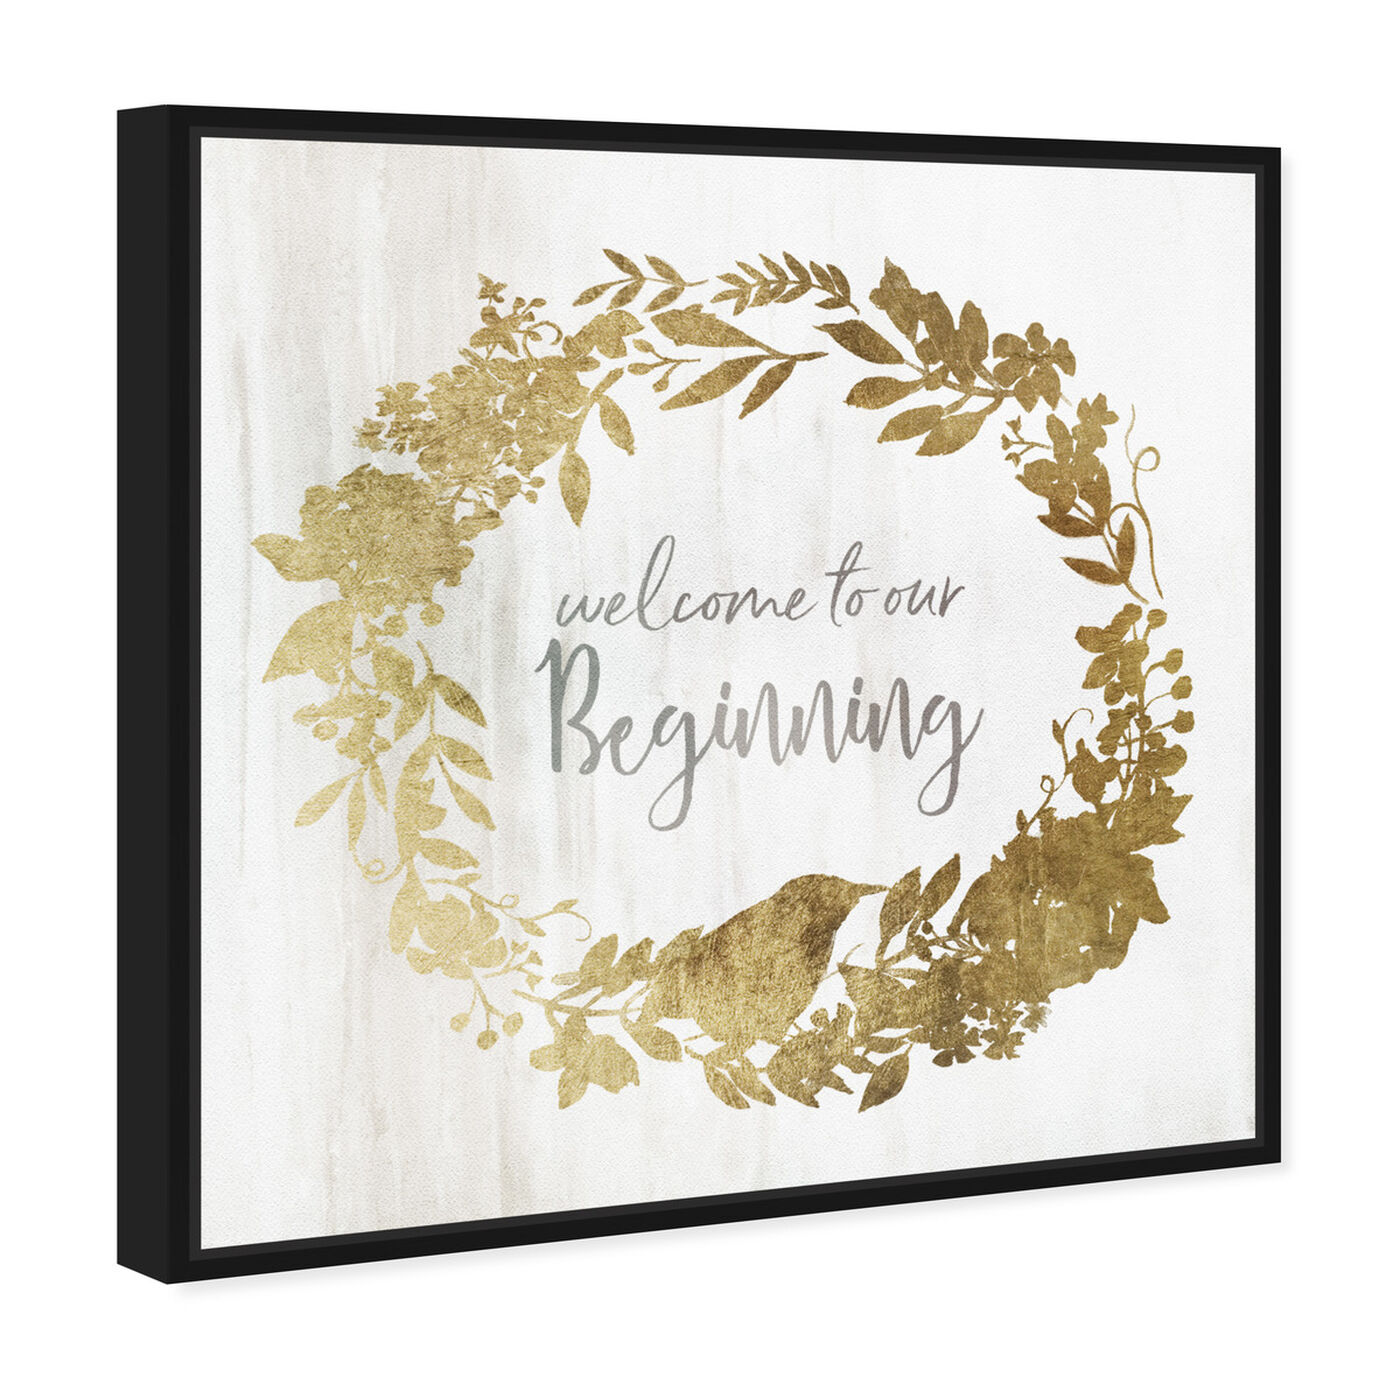 Angled view of Welcome to our Beginning featuring typography and quotes and love quotes and sayings art.